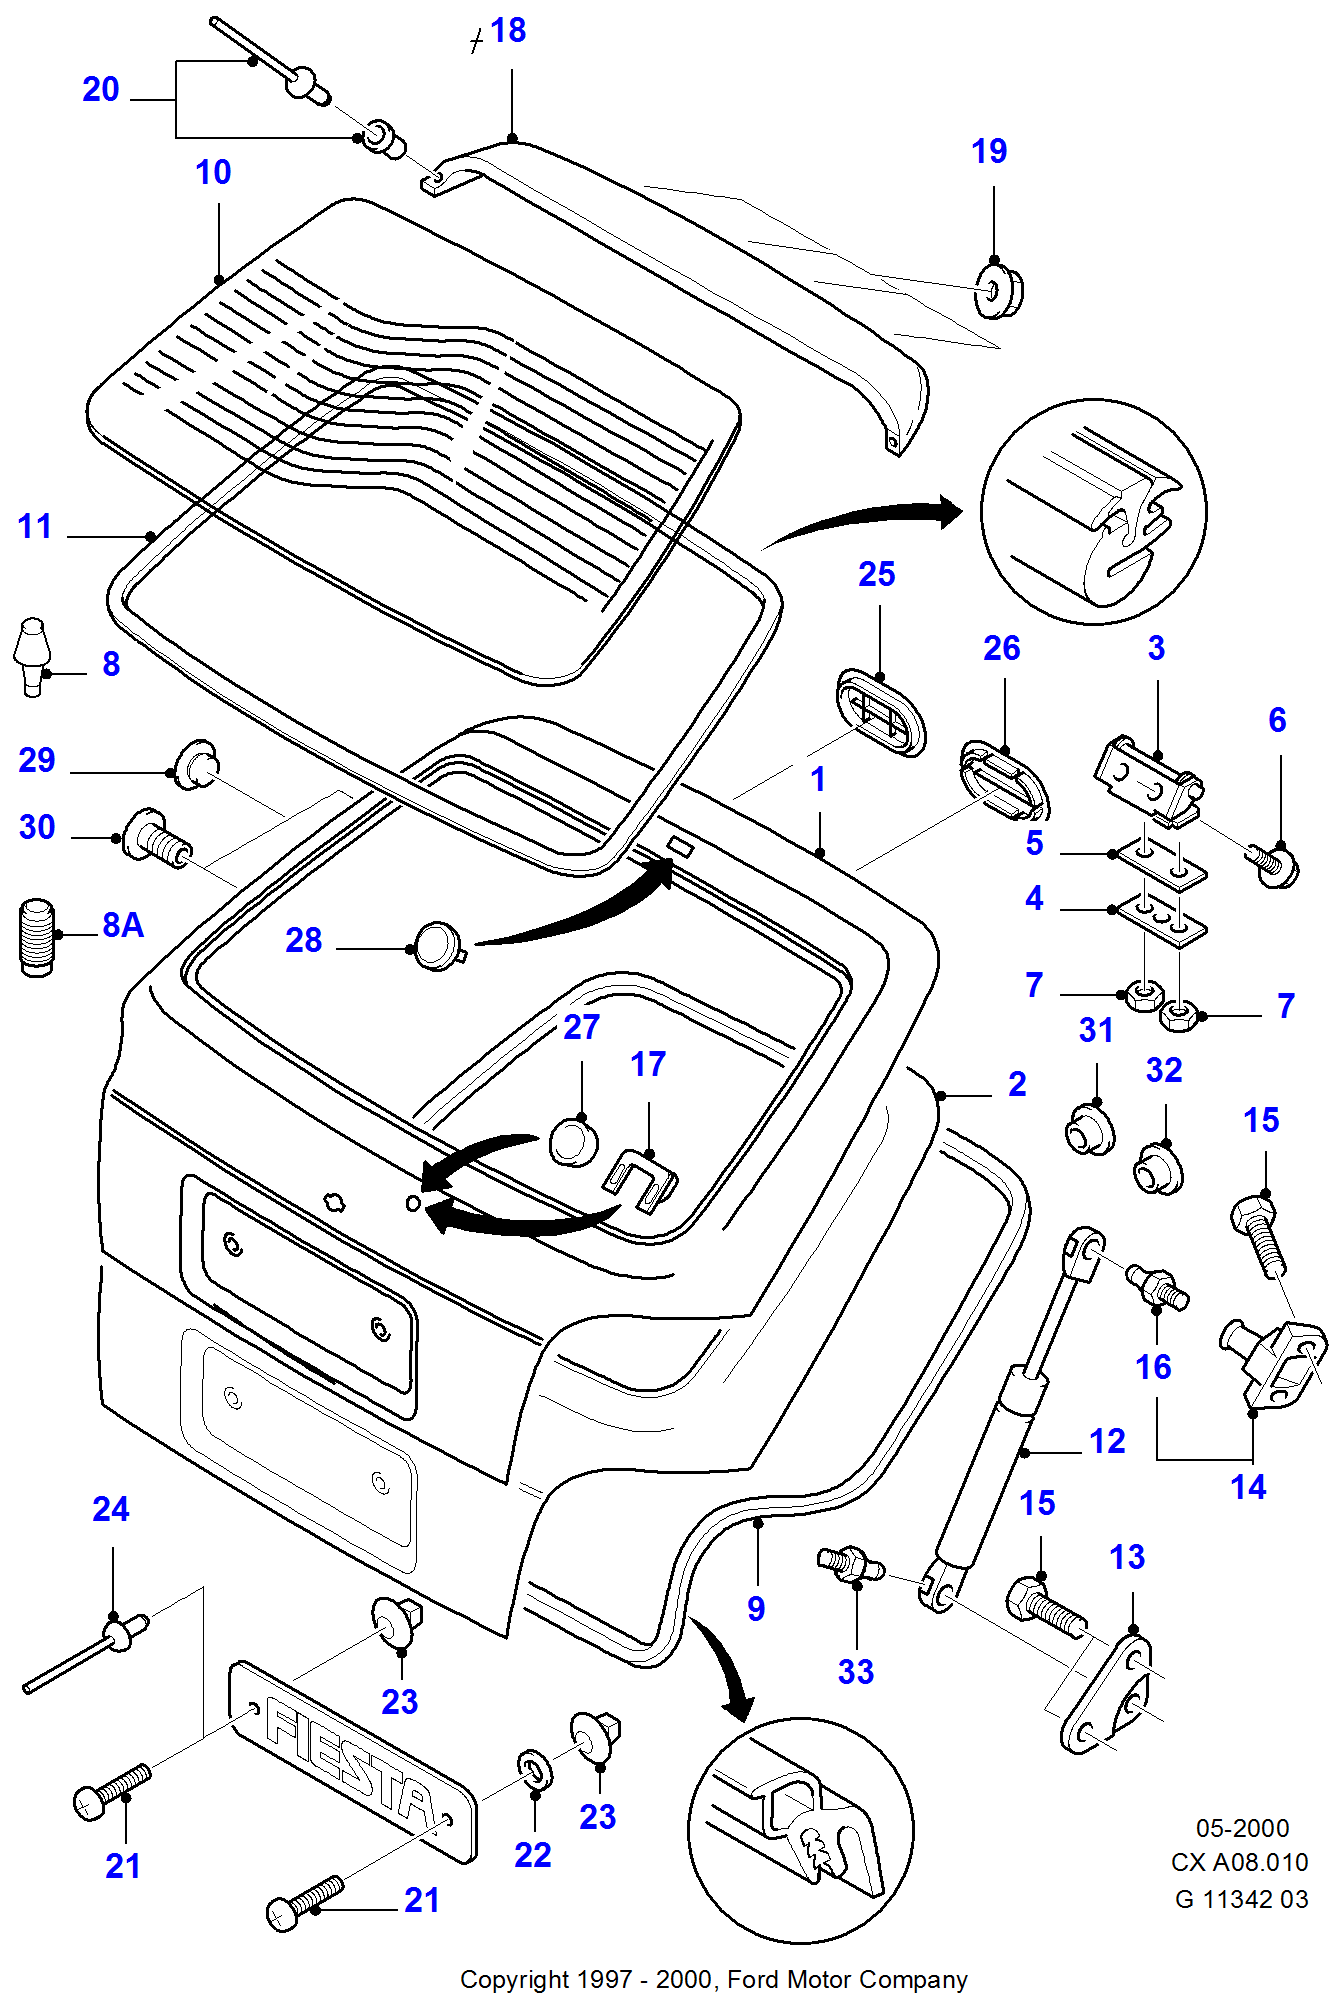 Tailgate And Related Parts pre Ford Fiesta Fiesta 1989-1996               (CX)